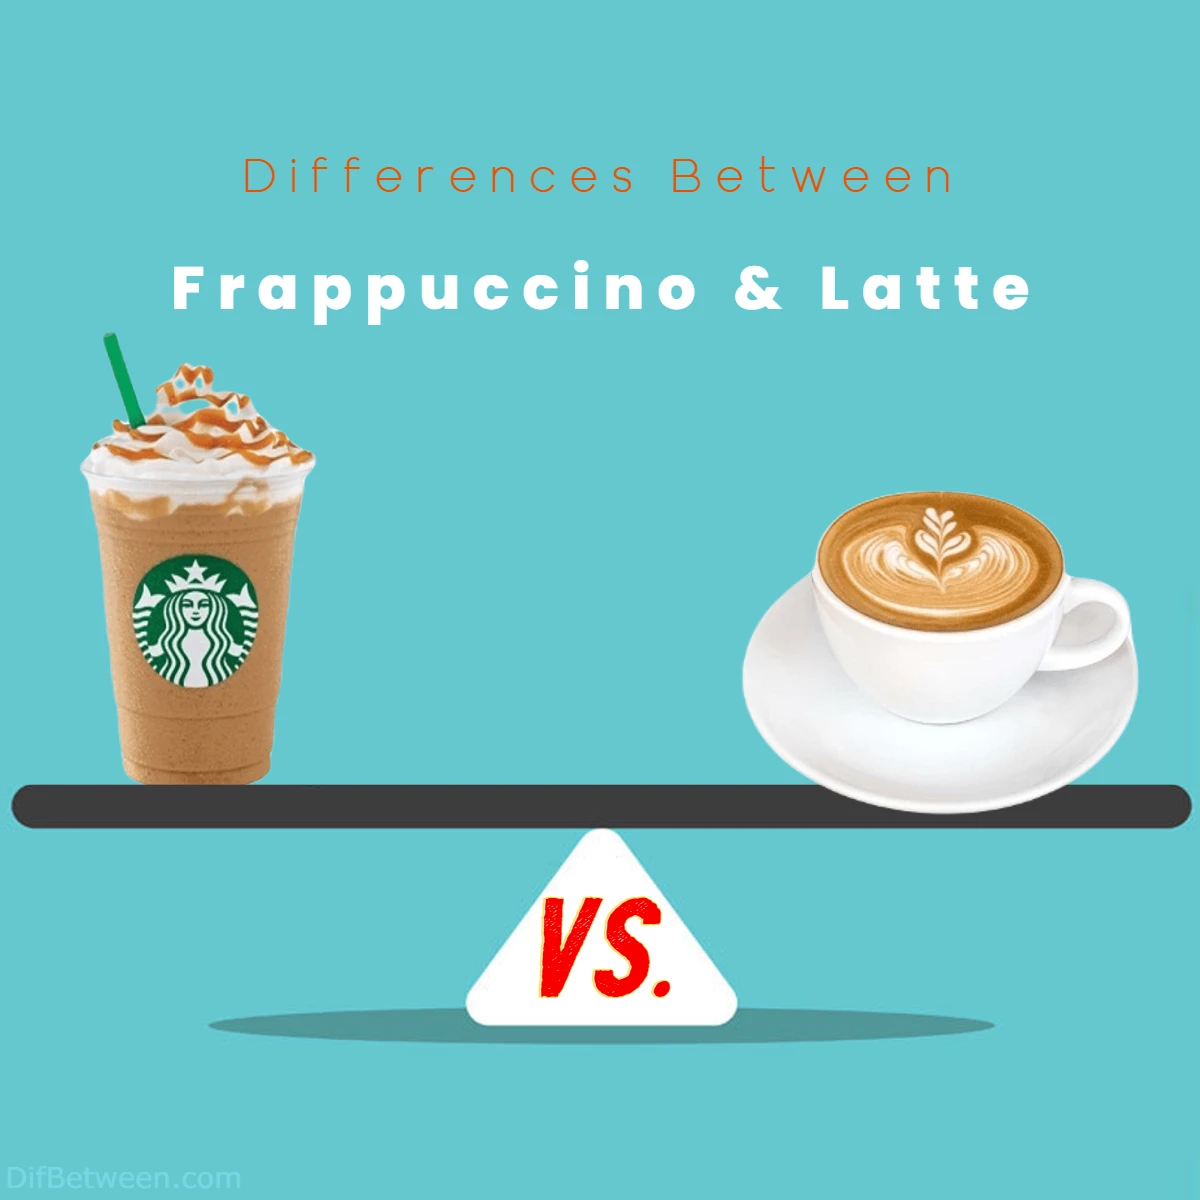 Differences Between Latte and Frappuccino